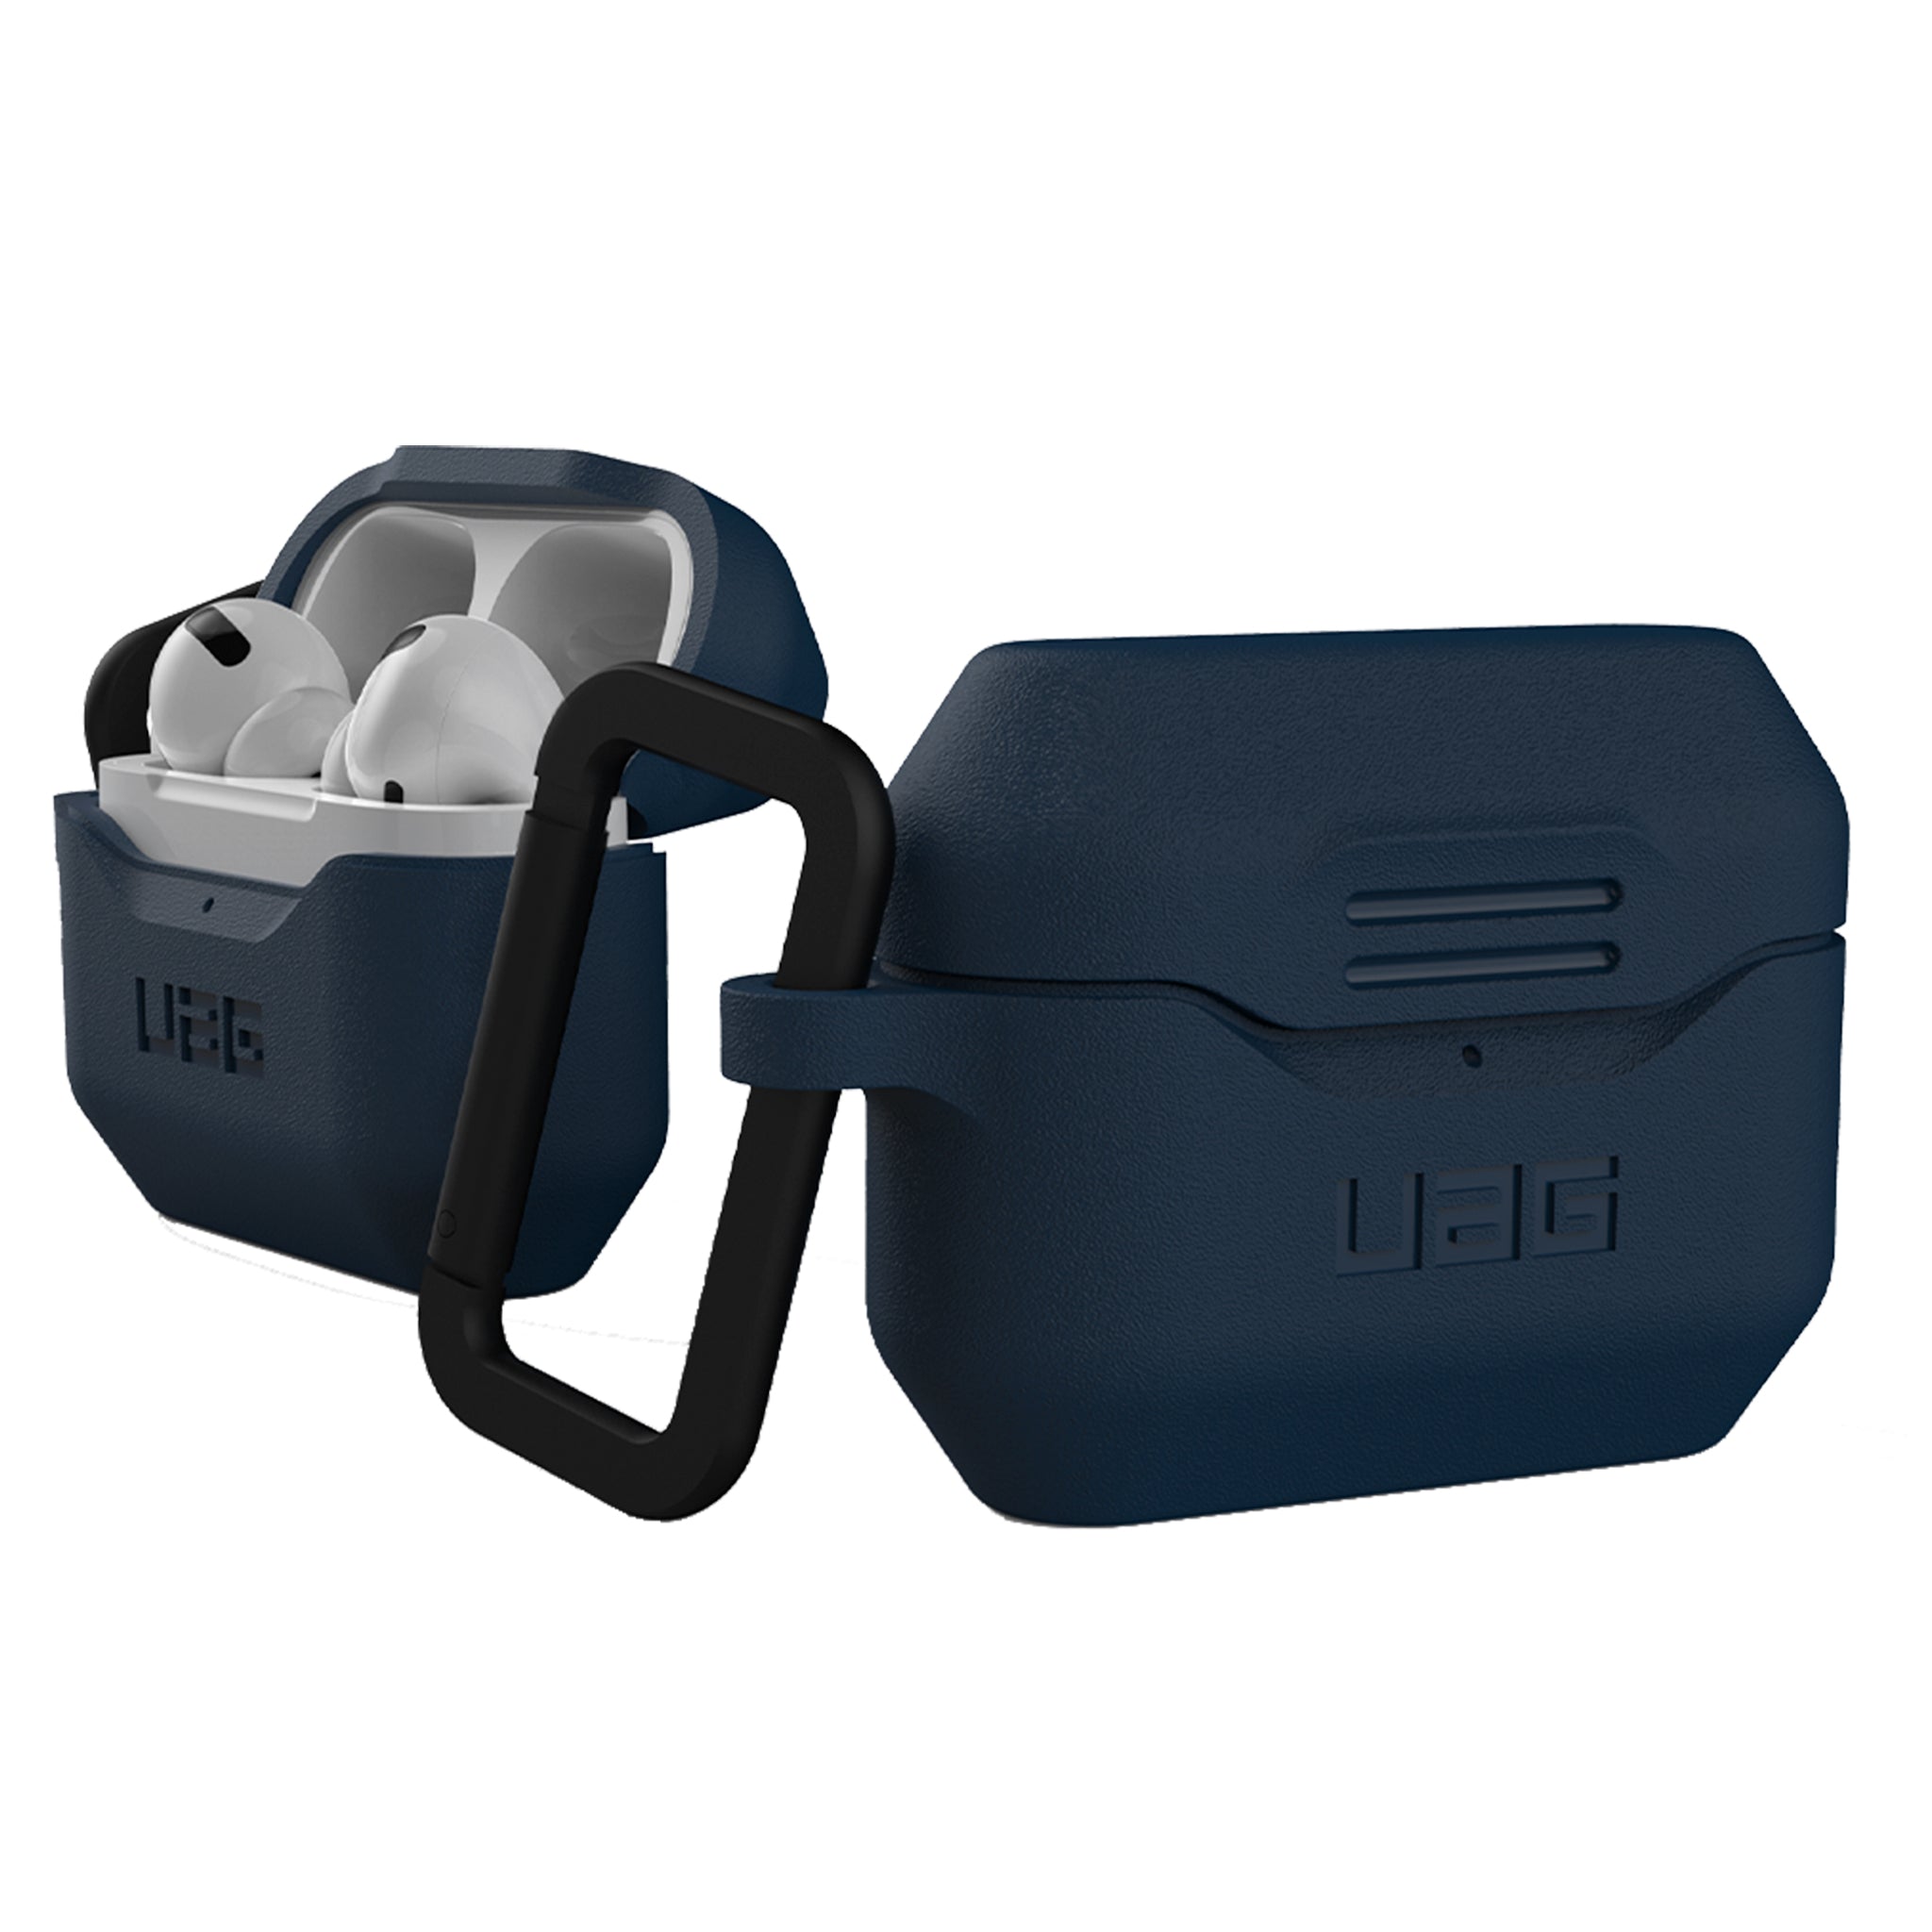 UAG - Standard Issue Silicone 001 Case For Apple Airpods Pro - Mallard